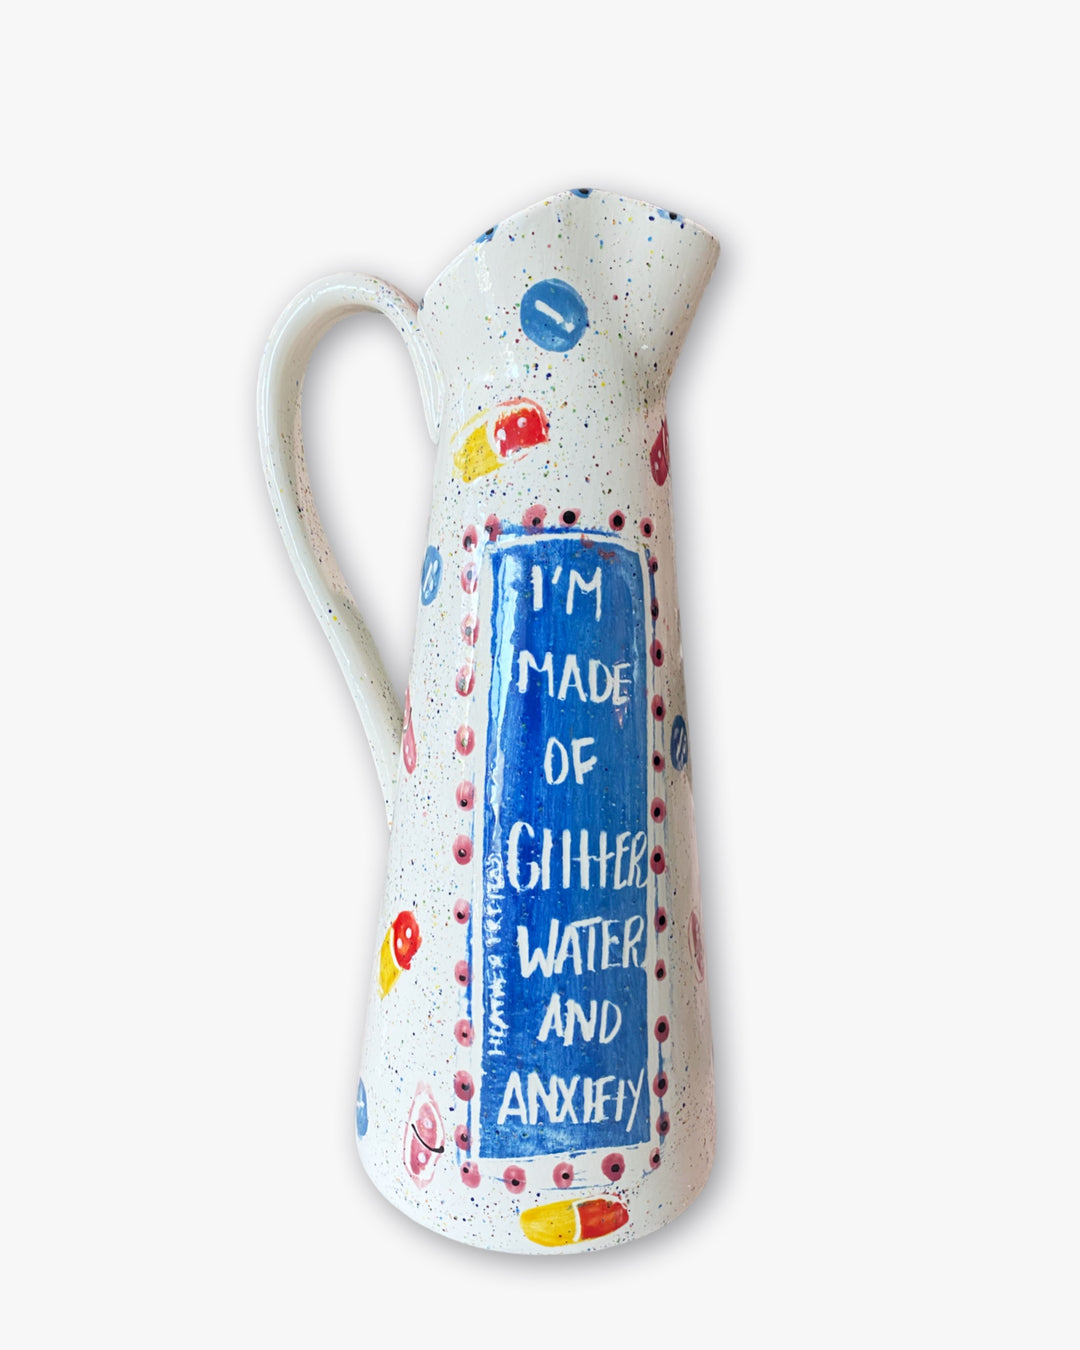 I Am Filled With Glitter, Sugar & Anxiety Pitcher ( hand painted glaze )